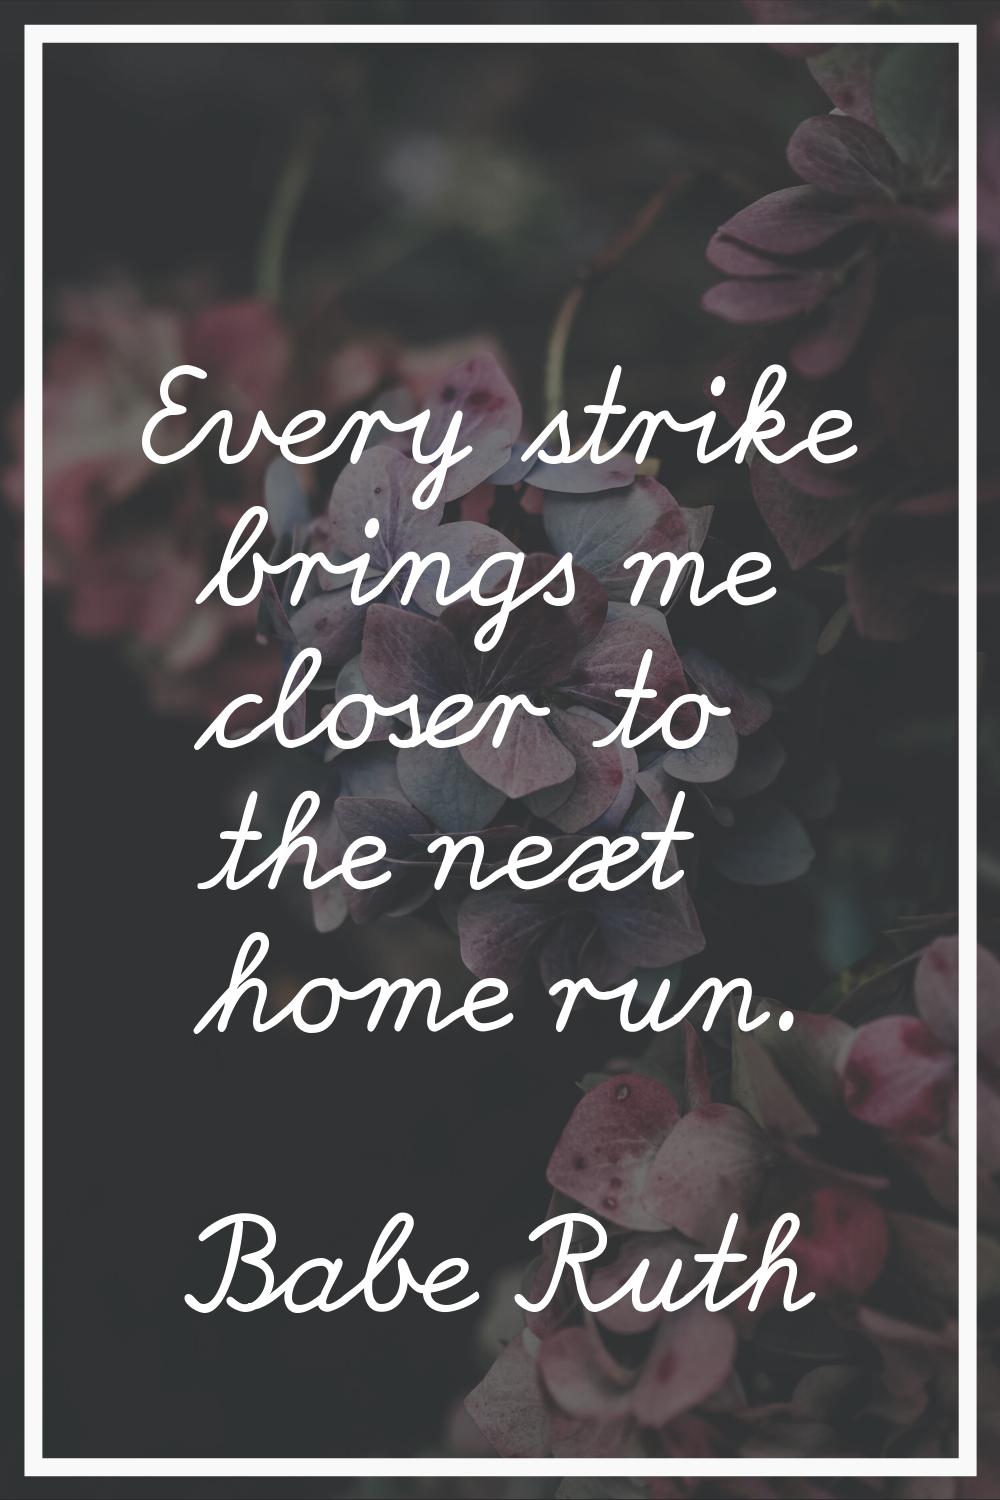 Every strike brings me closer to the next home run.